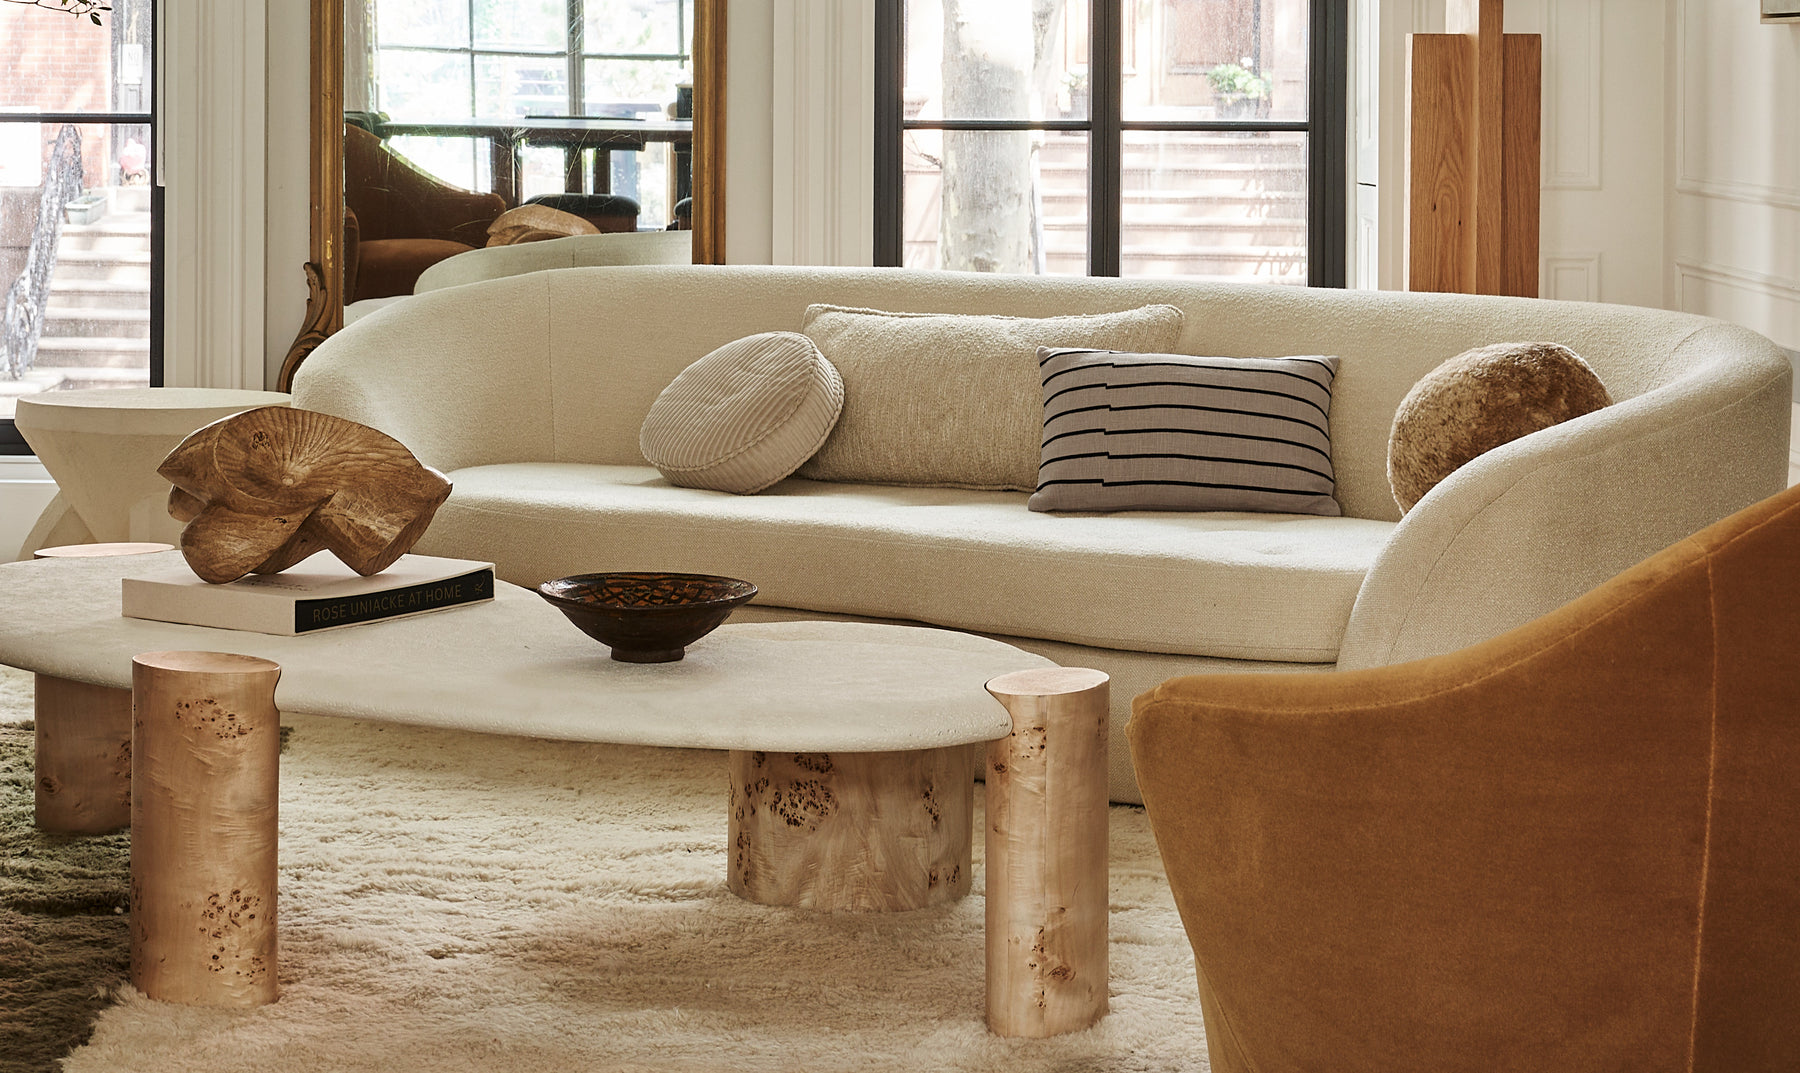 A Buyer’s Guide: How to Choose Your Sofa